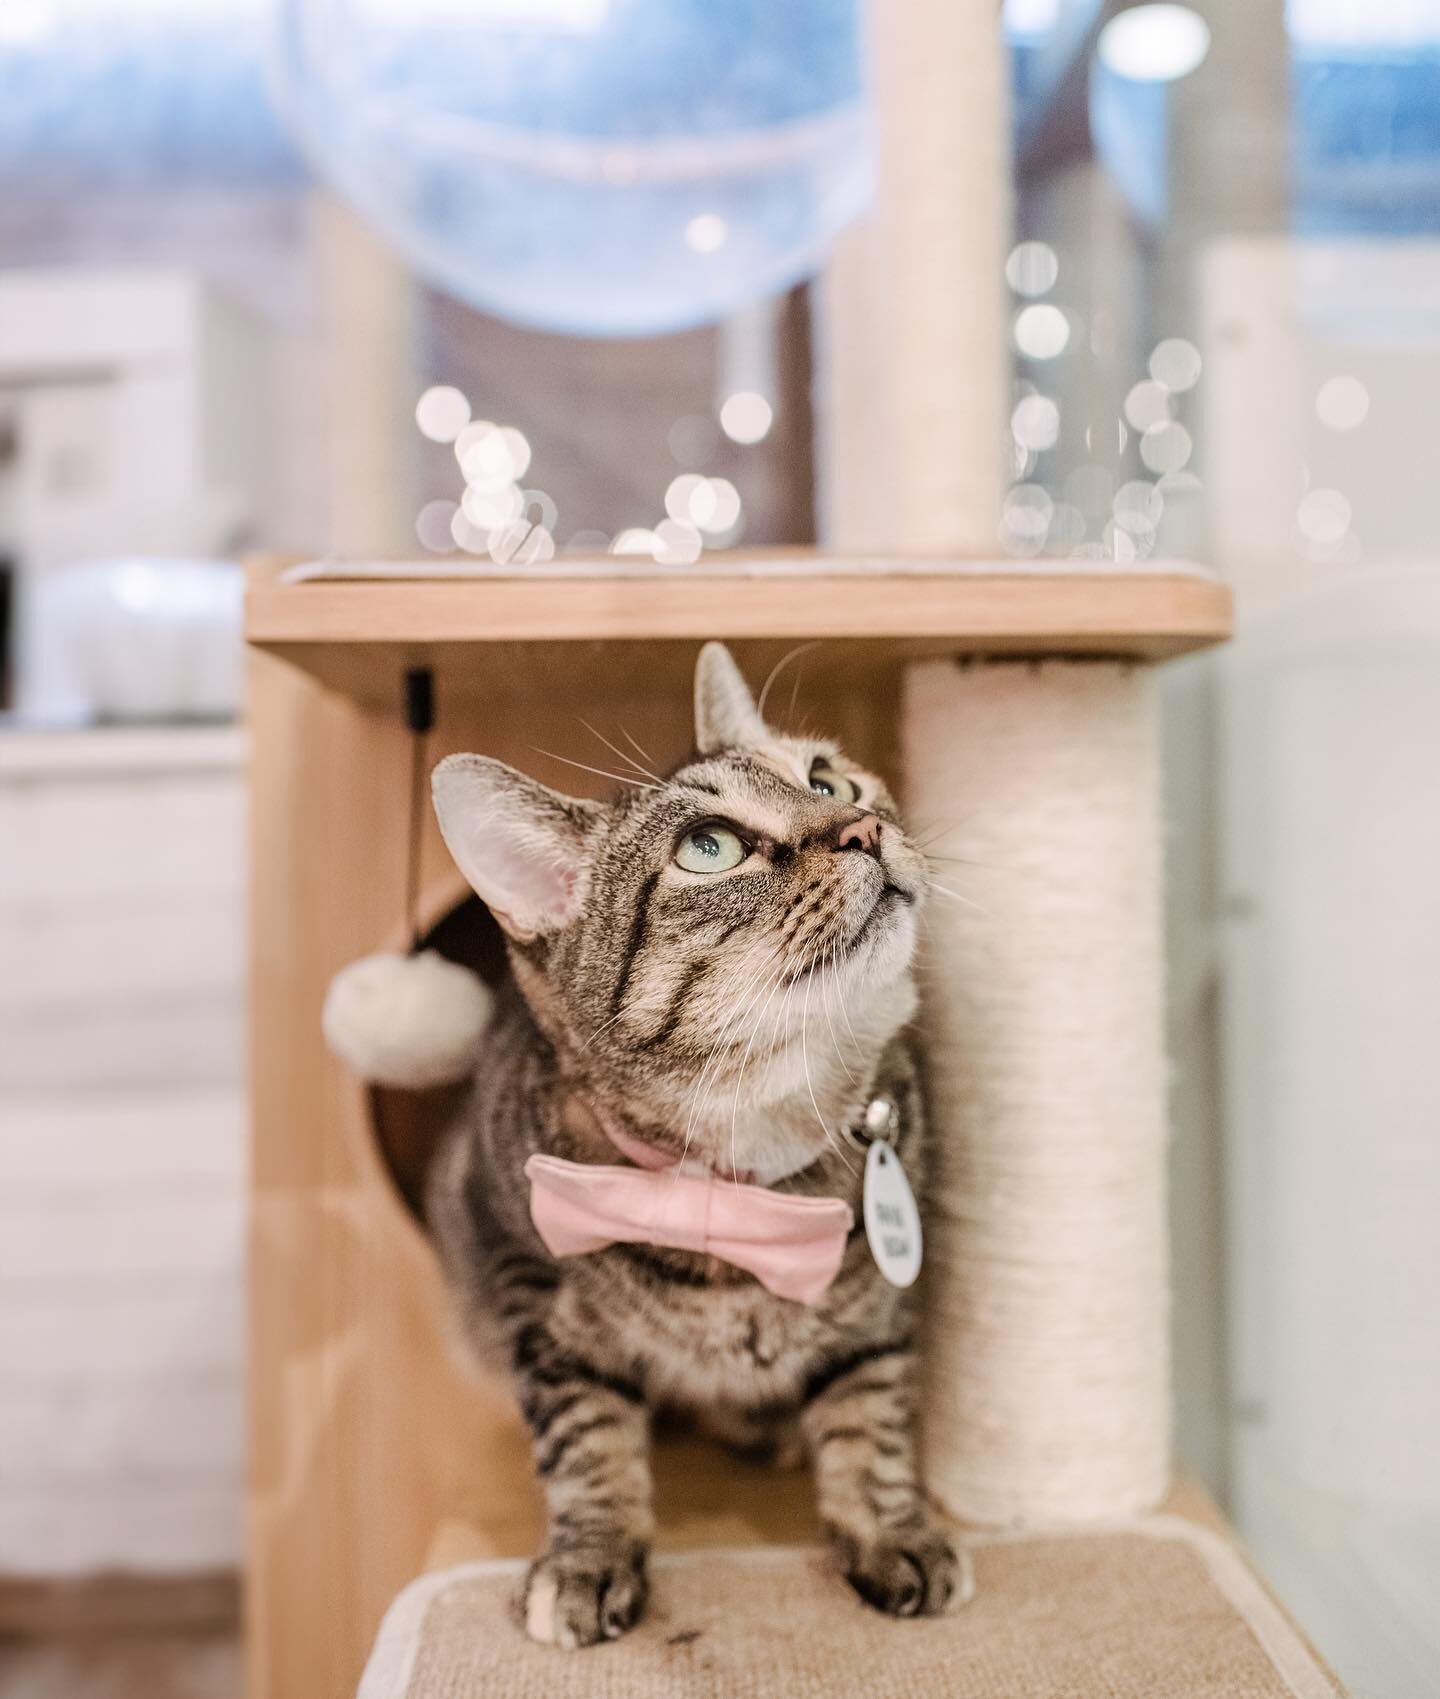 Meet Fava Bean, a survivor with a heart of gold! 💗 This sweet girl's journey started in a challenging hoarding situation, where she was one of over 120 cats rescued in West Virginia. Alongside her pals Navy Bean and Kidney Bean, who were adopted thi